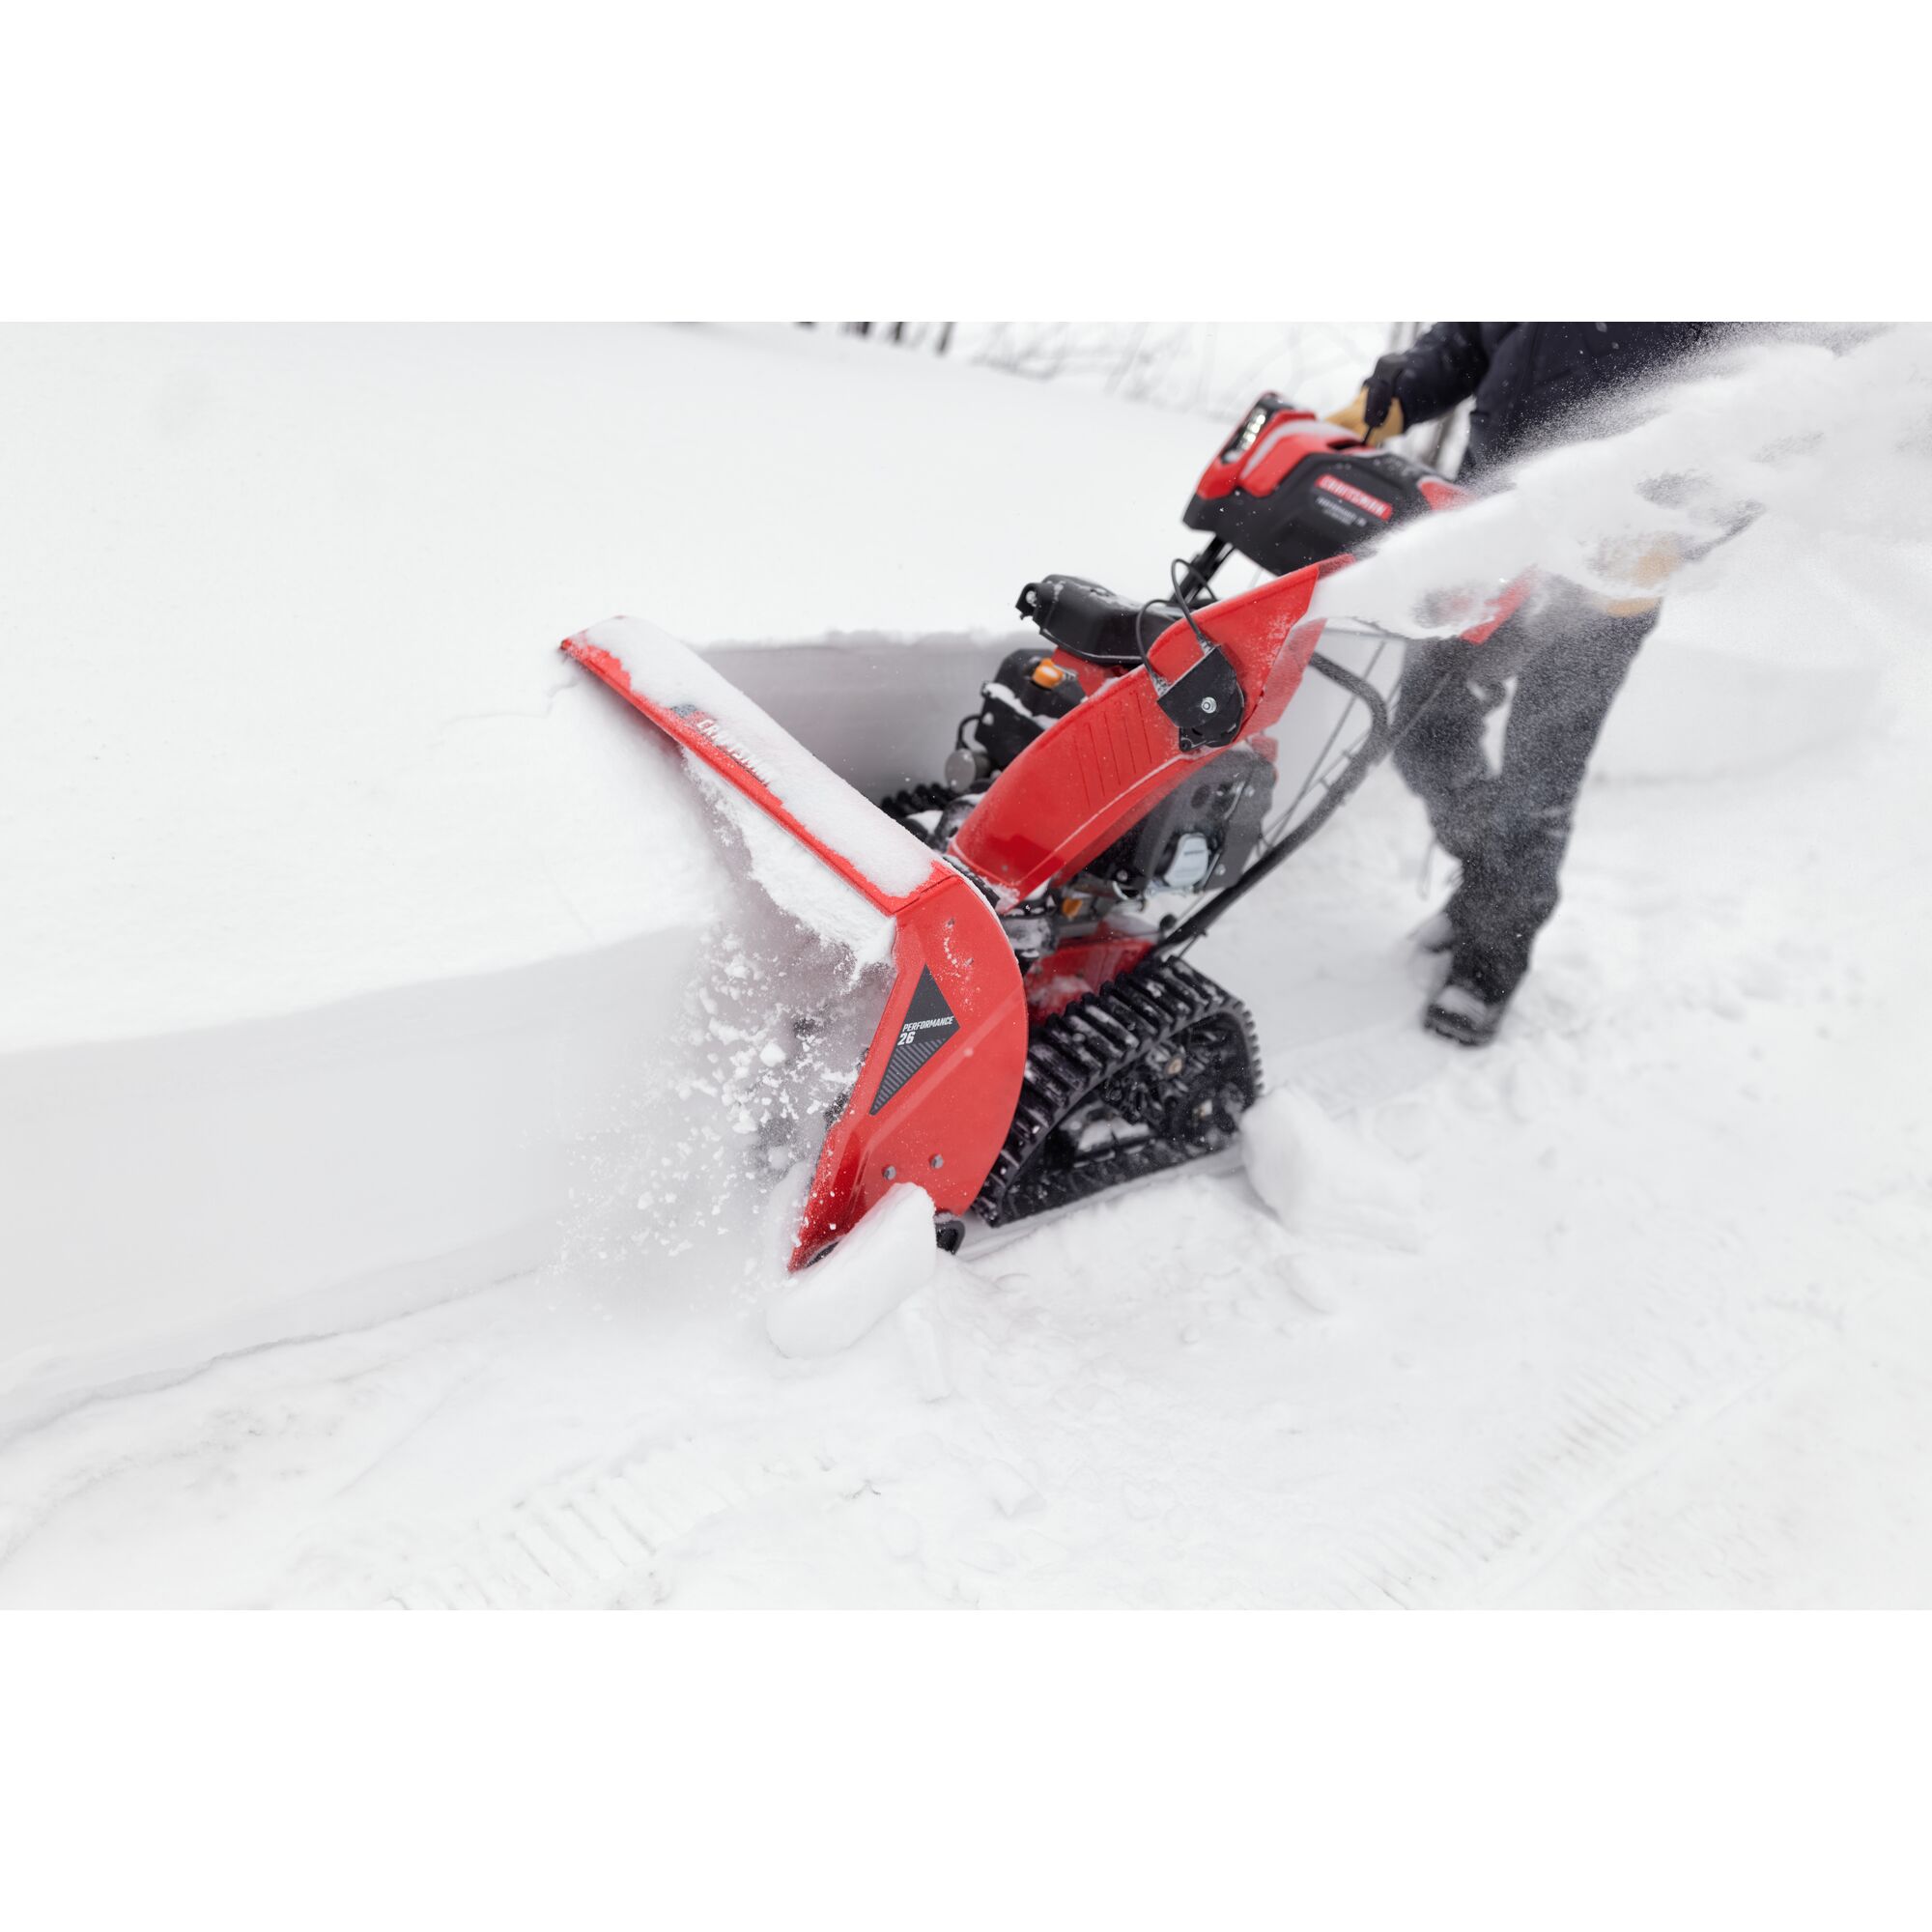 CRAFTSMAN Performance 26 Track Snowblower clearing tall snow off driveway